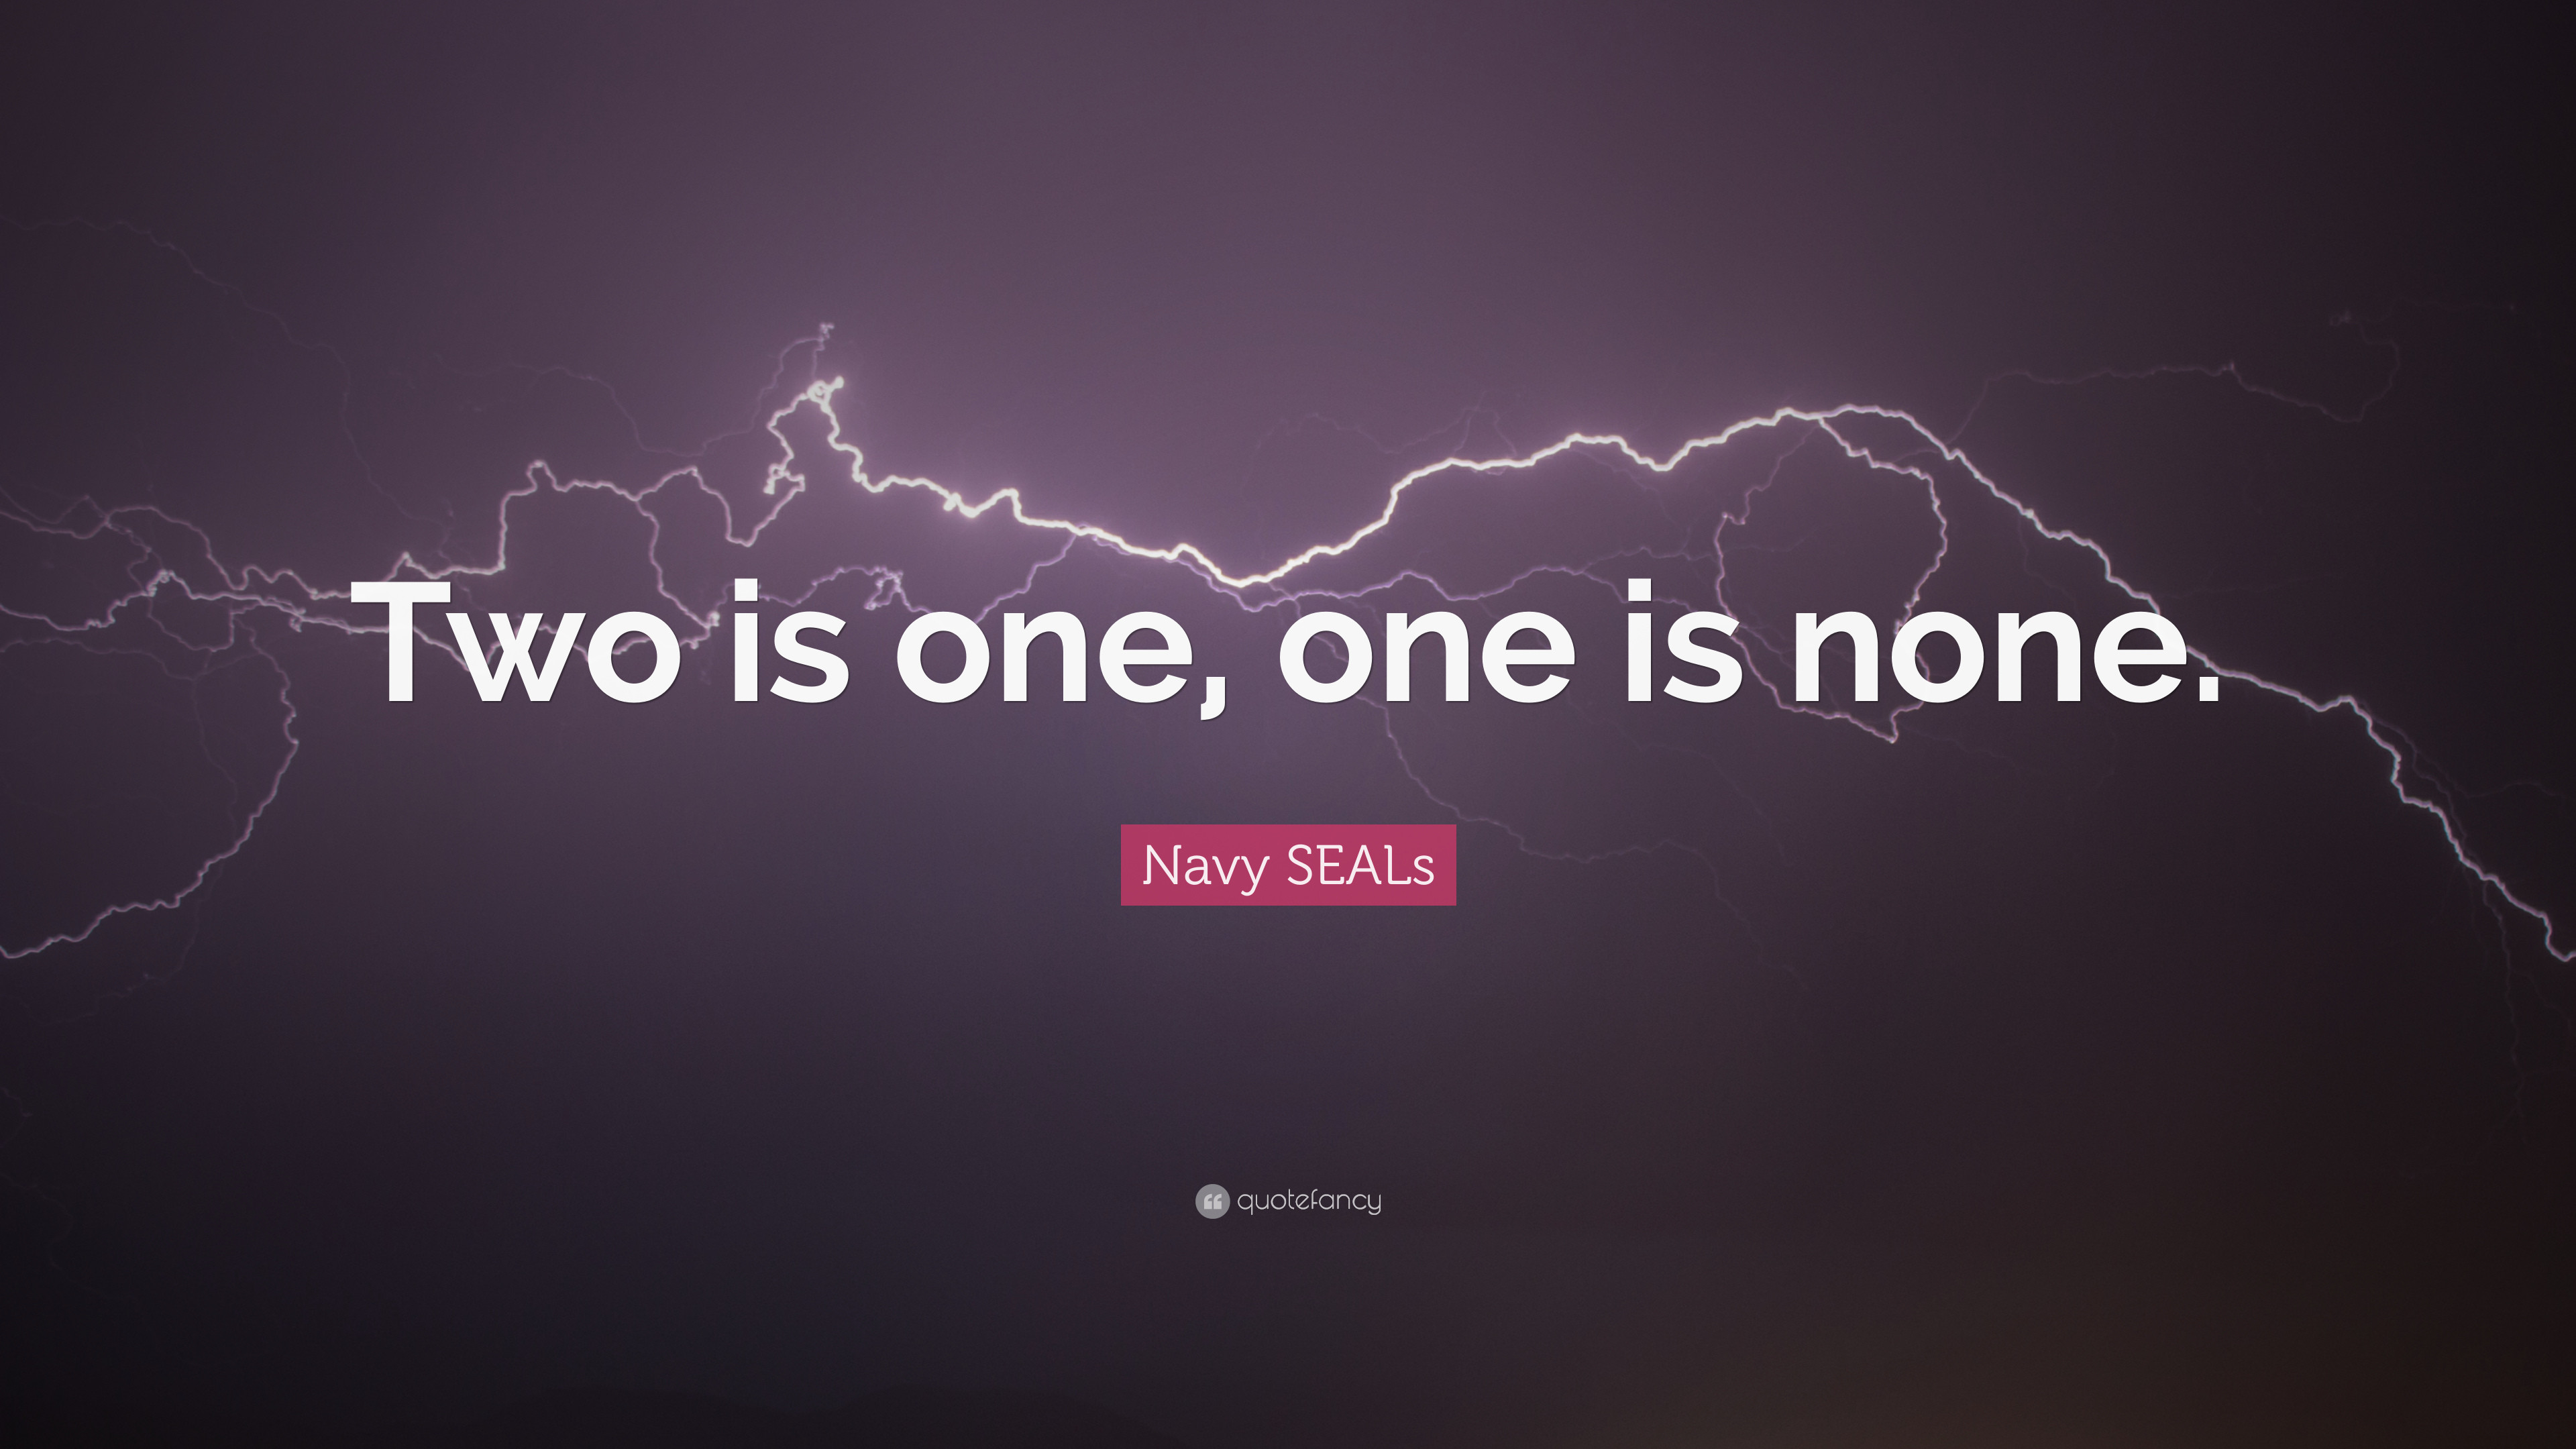 3840x2160 Navy SEALs Quote: “Two is one, one is none.”